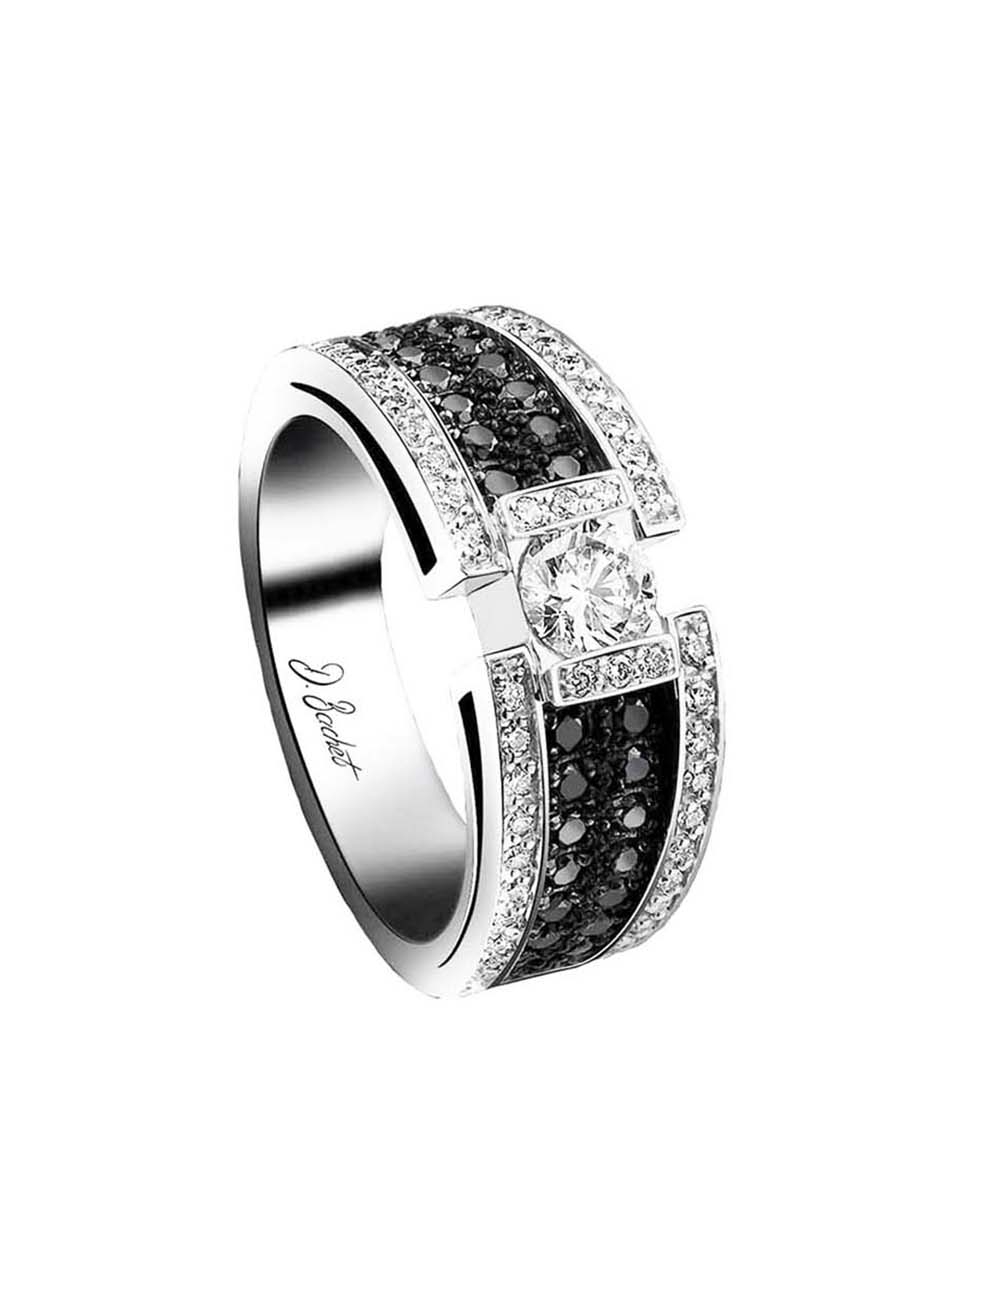 Luxury women's ring set with a 0.50 carat white diamond and a black and white diamonds pavé